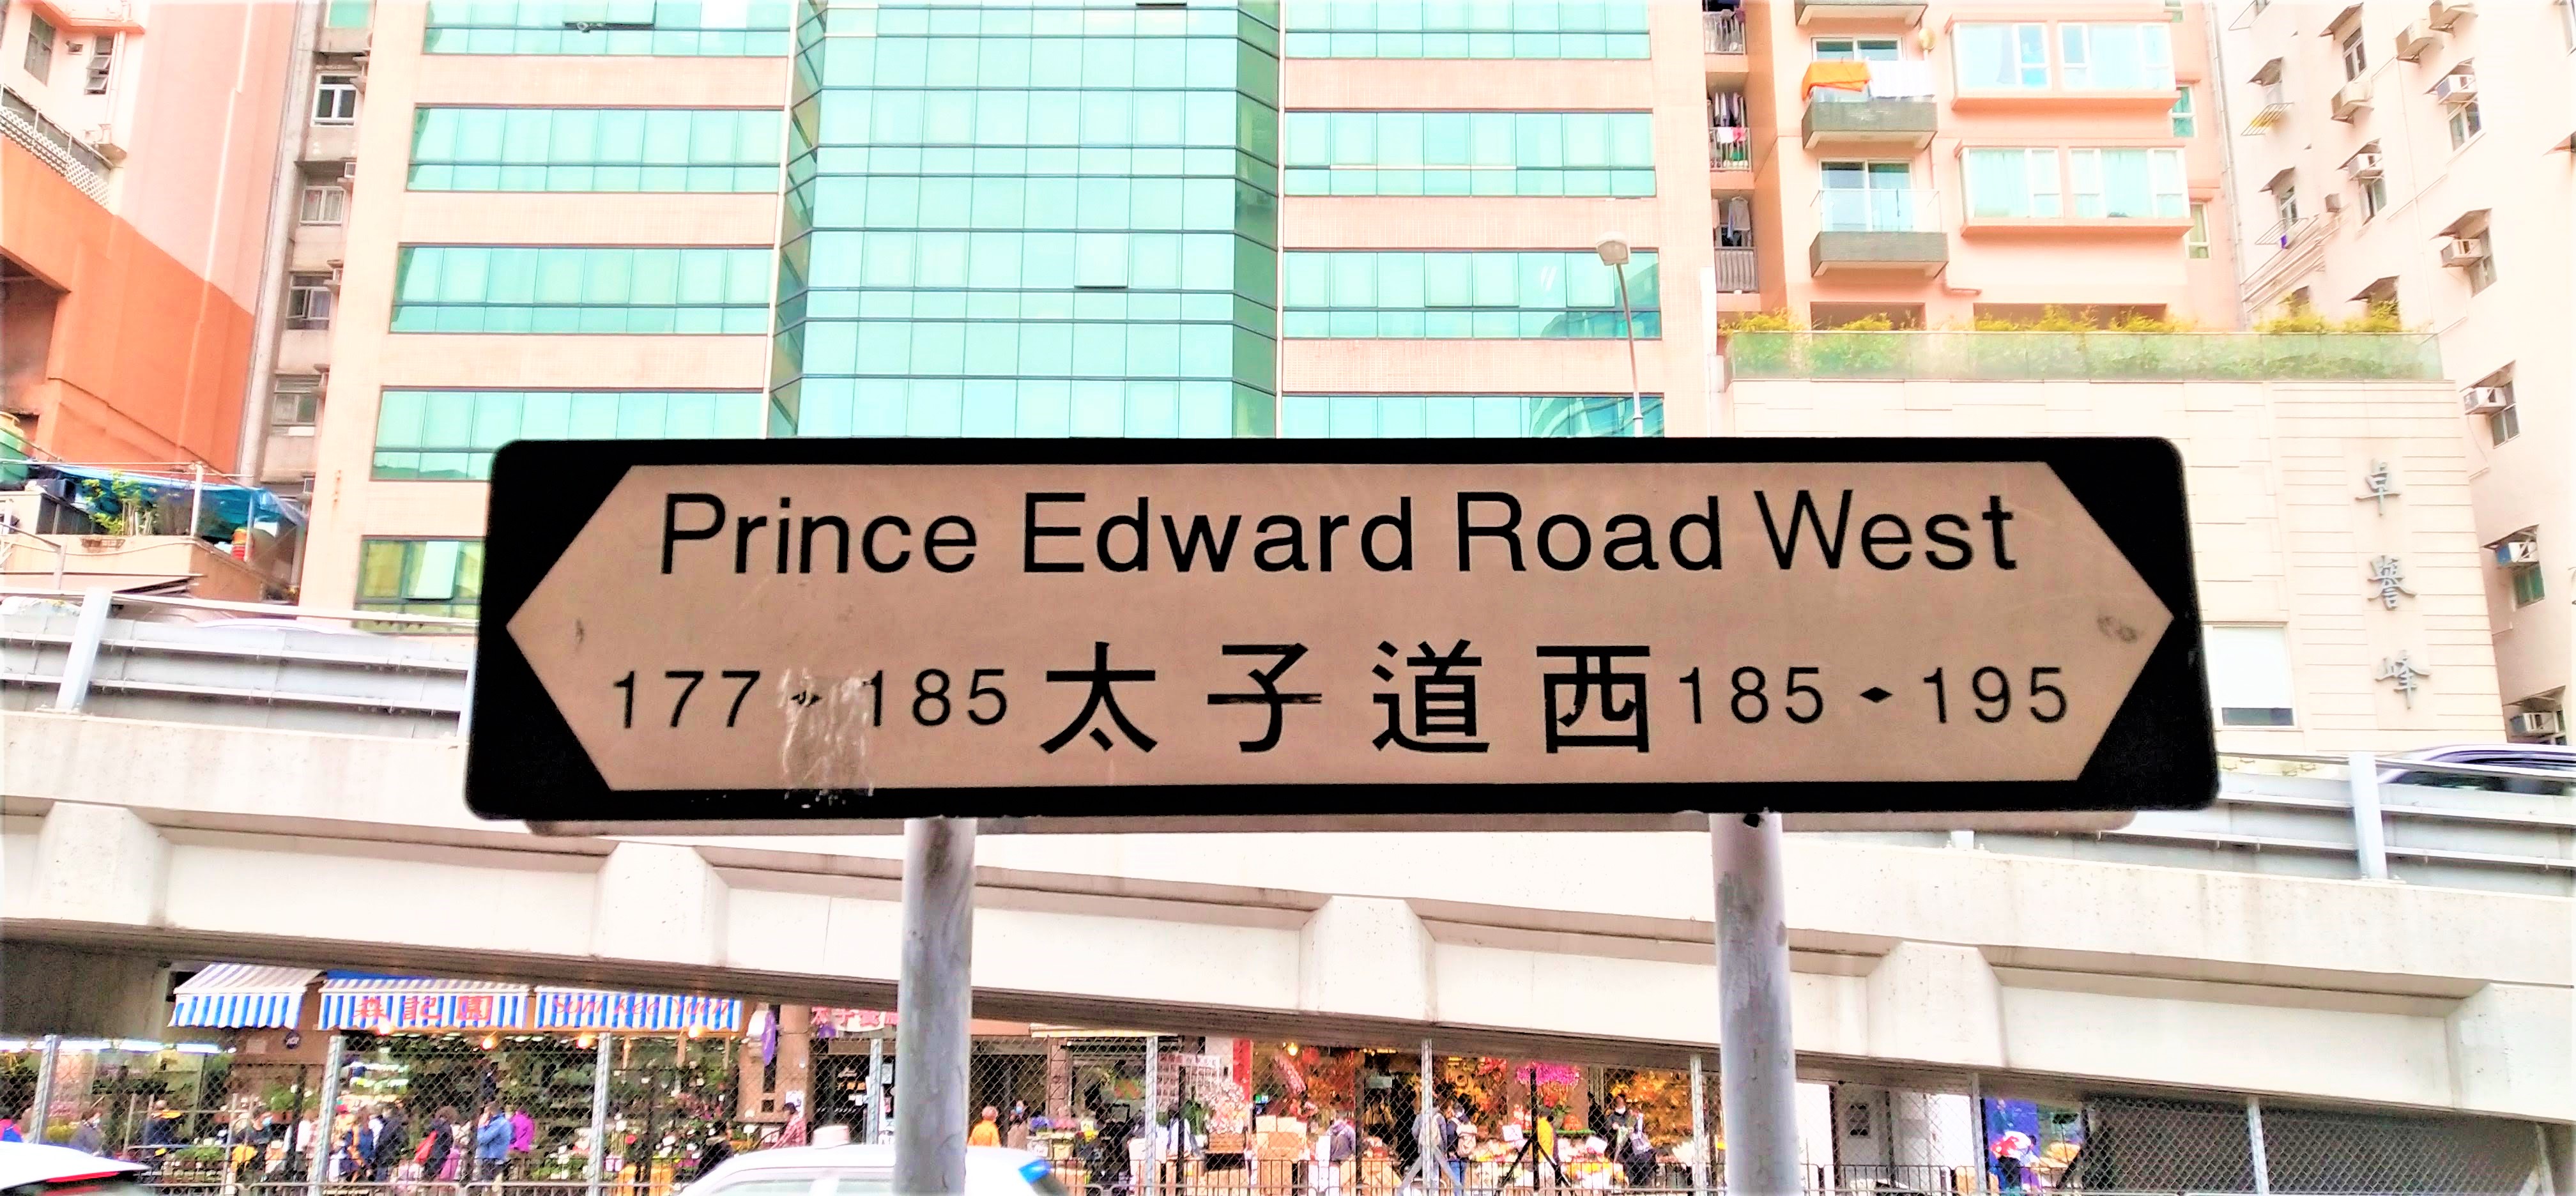 Prince Edward Road remembers Prince Edward's visit in 1922.